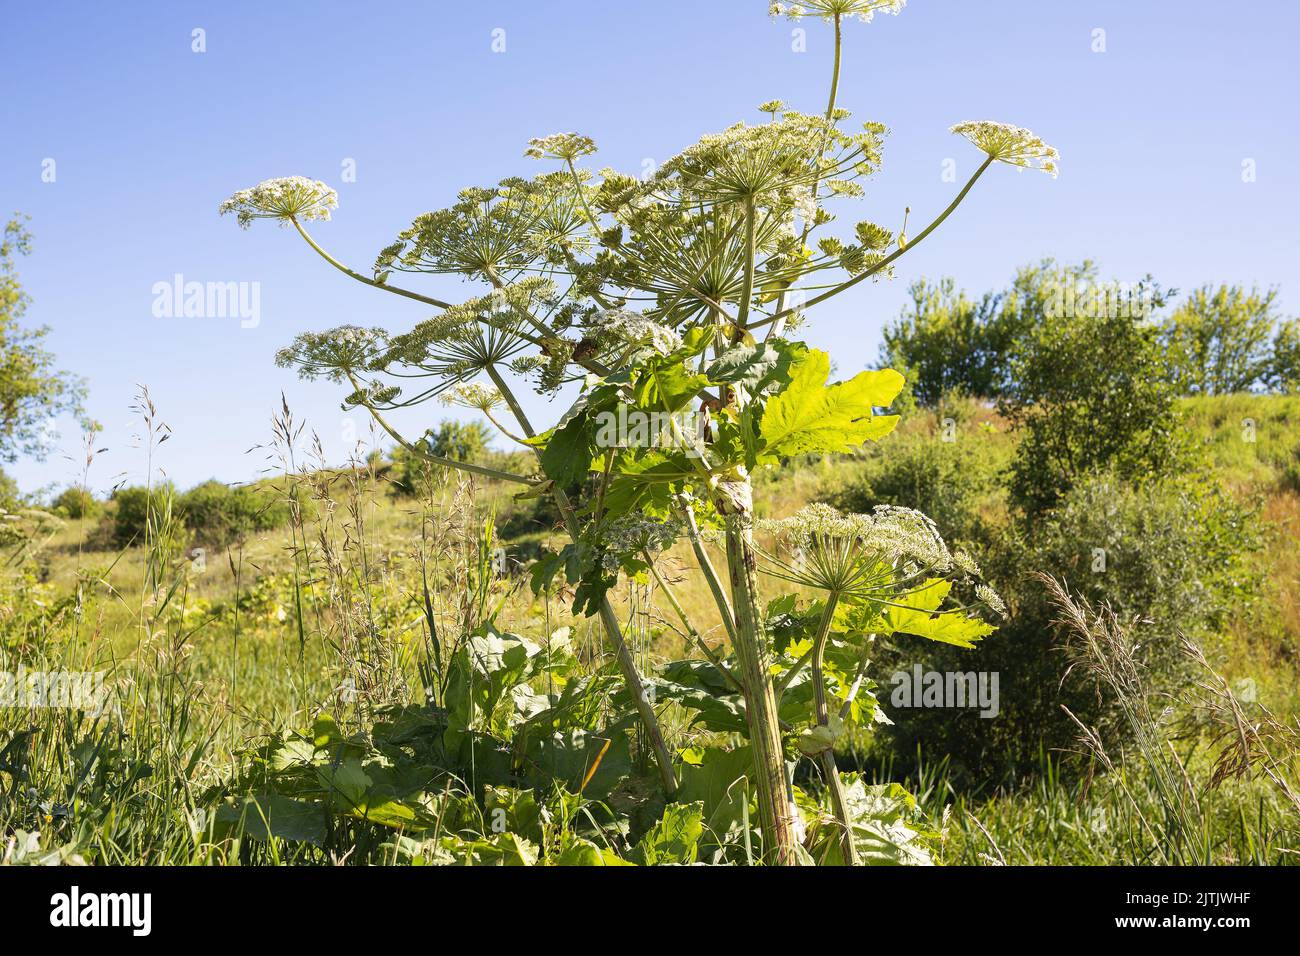 Poisonous plant hogweed, a weed dangerous to humans Stock Photo